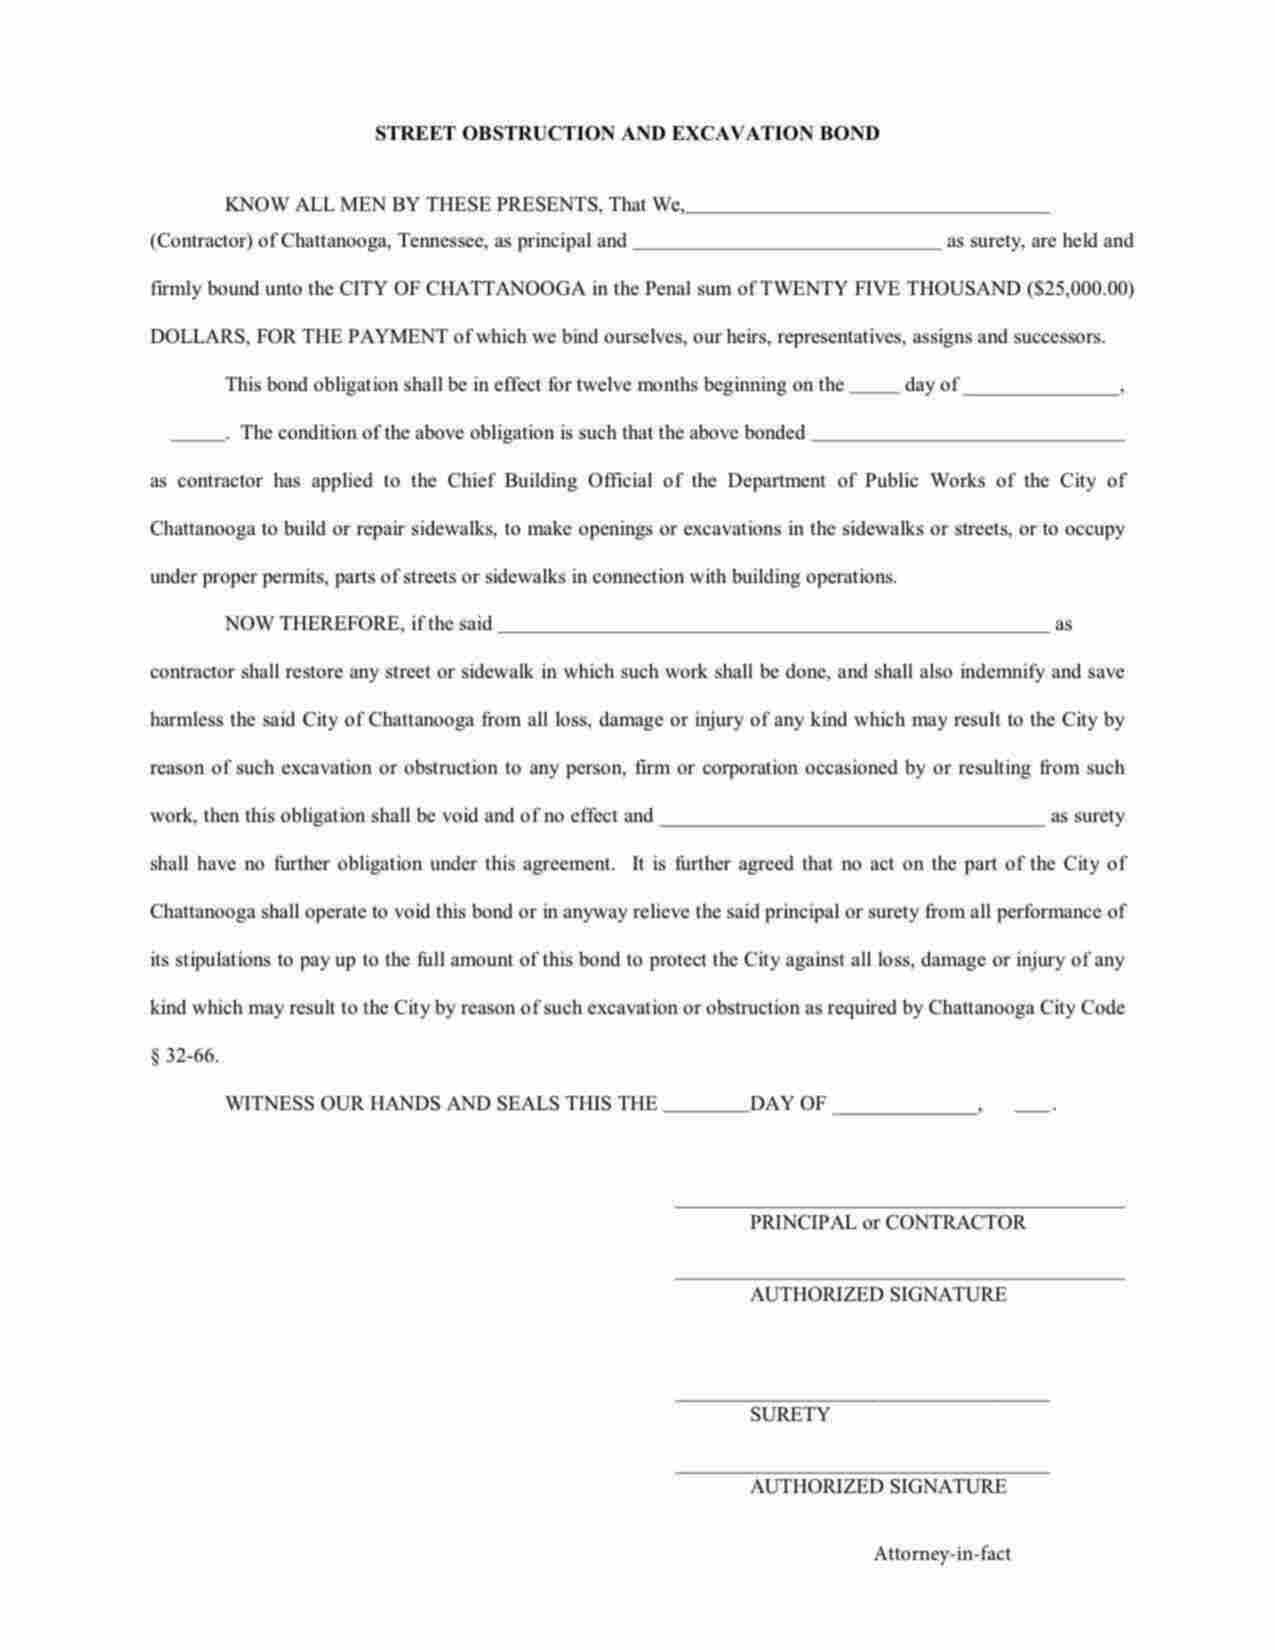 Tennessee Street Obstruction and Excavation Bond Form